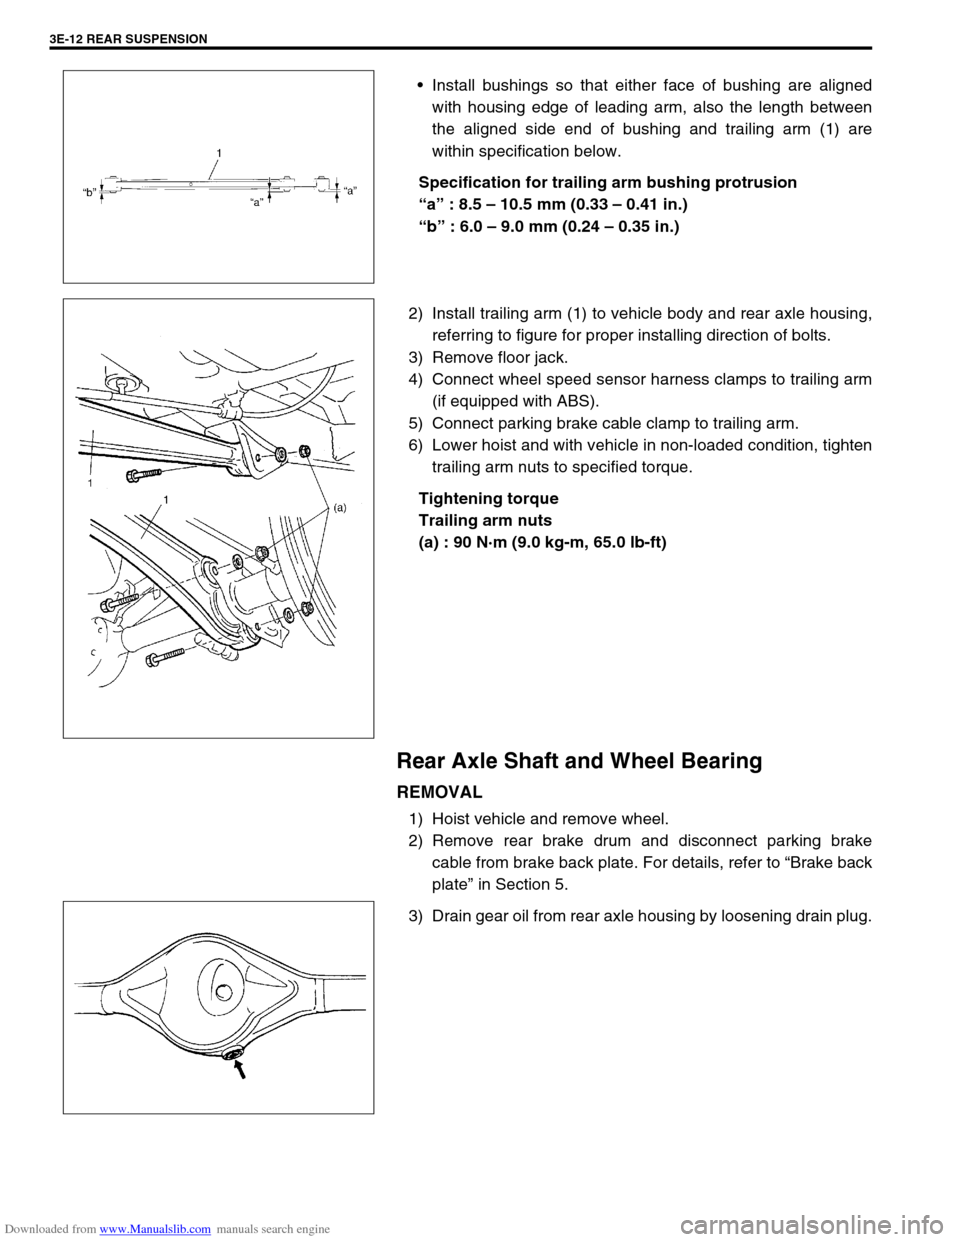 SUZUKI JIMNY 2005 3.G Service Owners Manual Downloaded from www.Manualslib.com manuals search engine 3E-12 REAR SUSPENSION
Install bushings so that either face of bushing are aligned
with housing edge of leading arm, also the length between
th